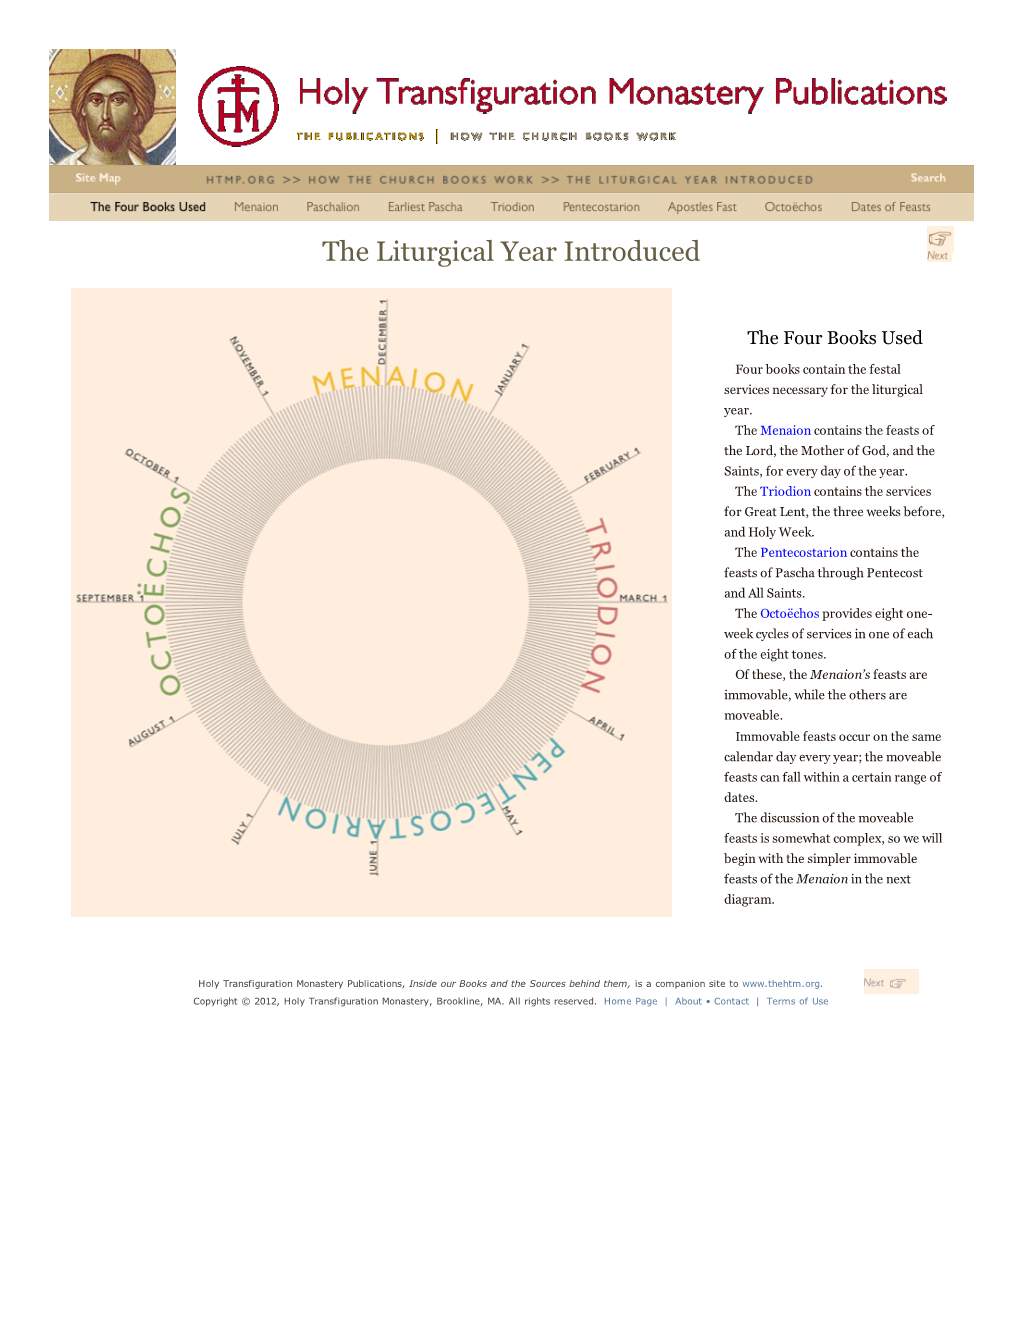 The Liturgical Year Introduced